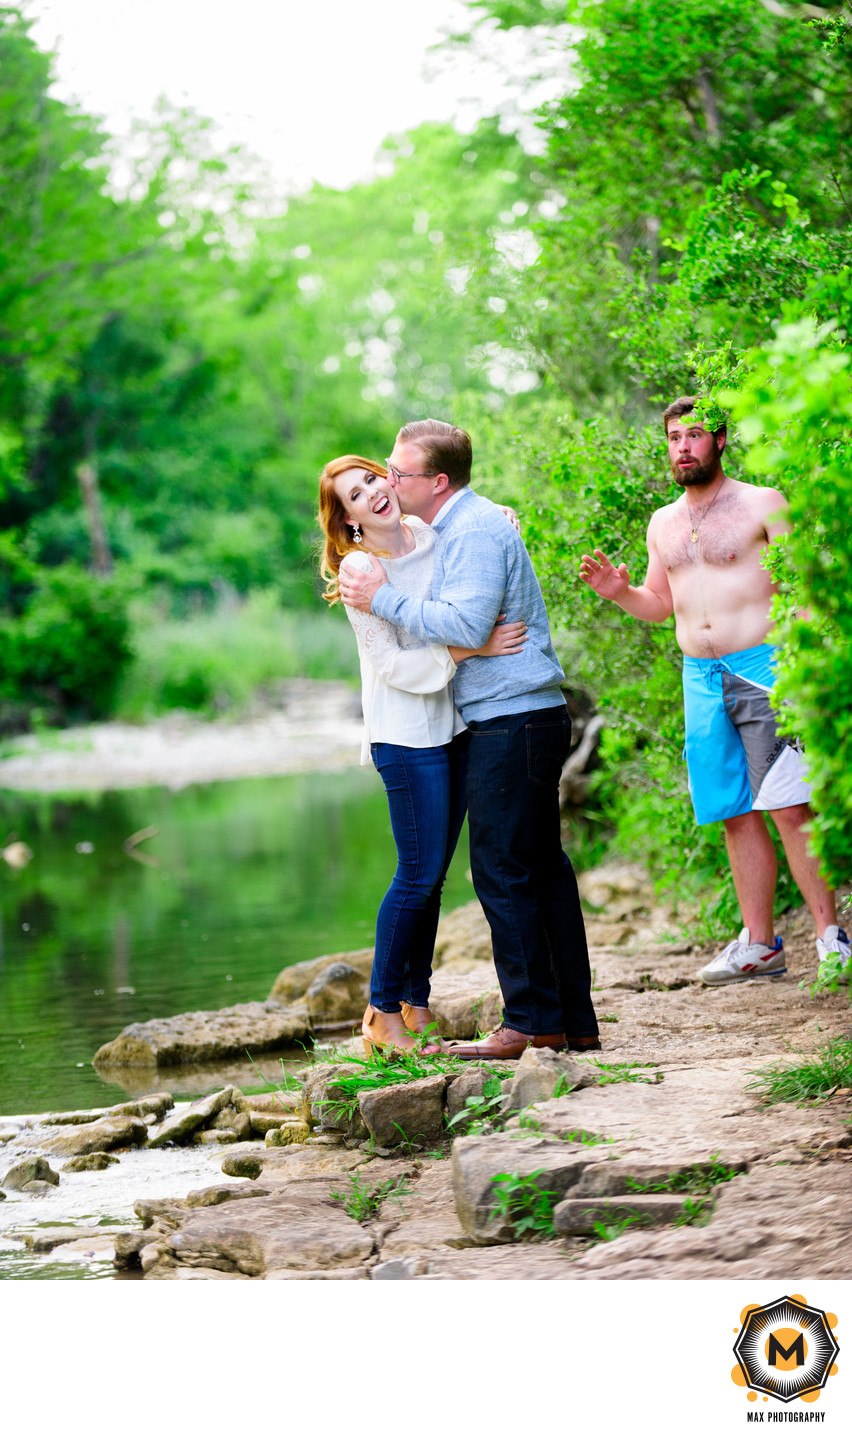 Funny Engagement Session Photo of Couple Outdoors